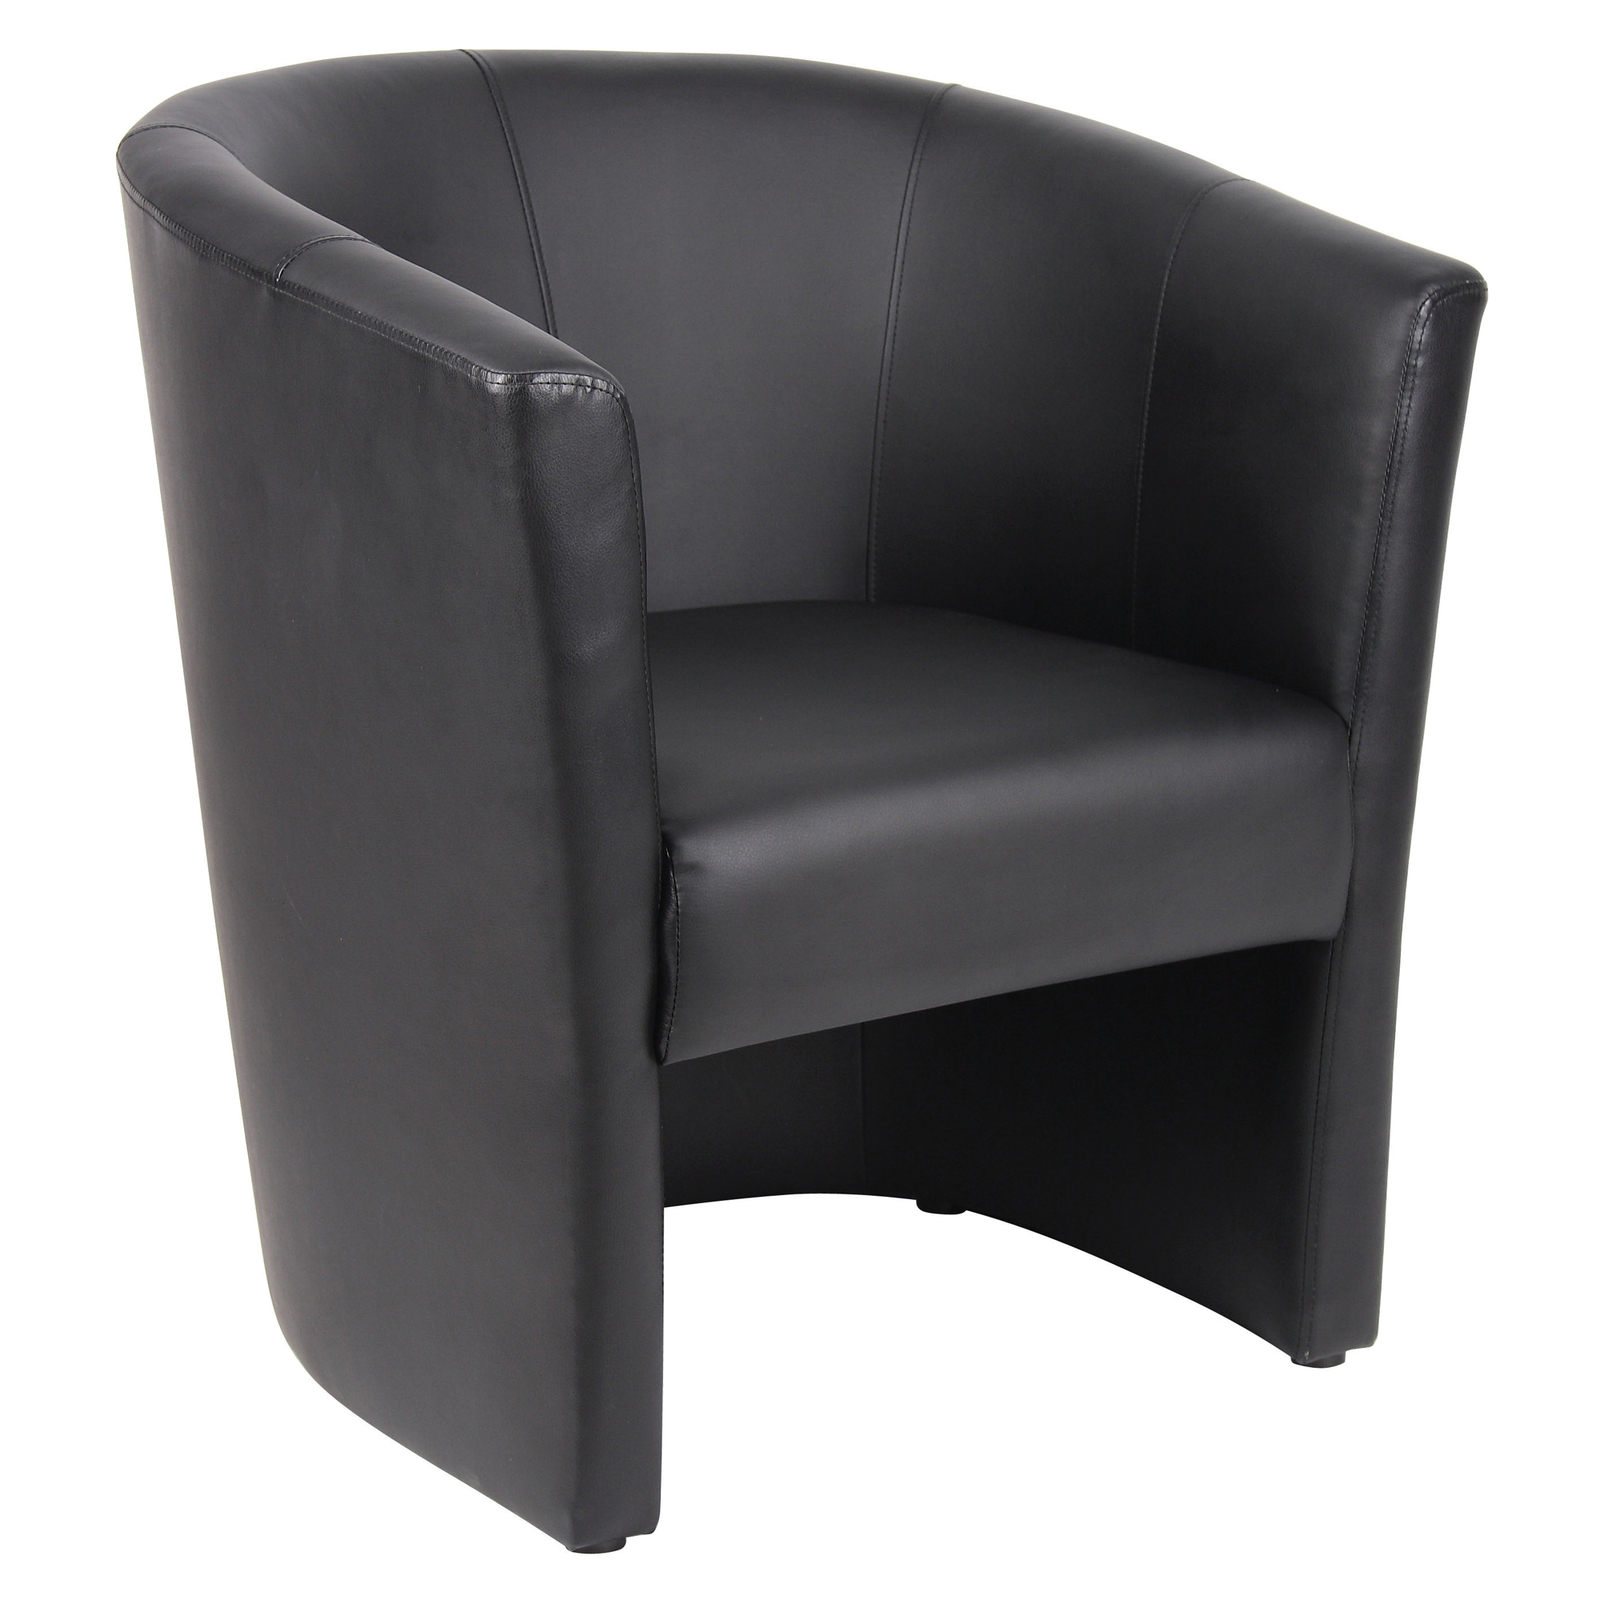 Visitors Tub Chair Reception Seat Office Furniture Seating YS Design Black YS900-1